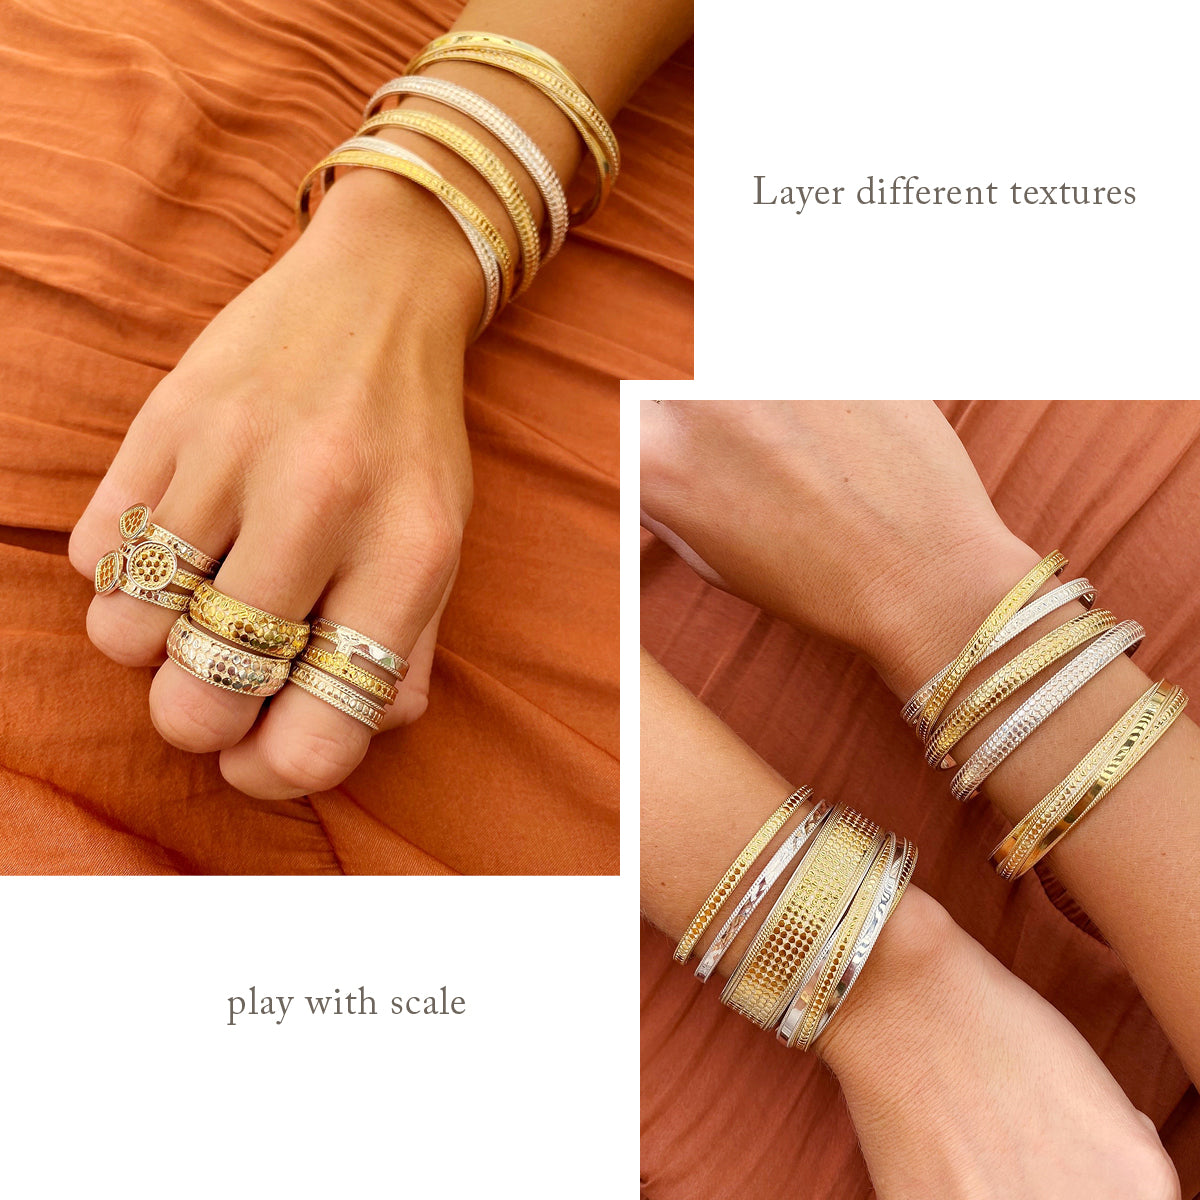 Mixing Silver and Gold Jewelry: How to Do it Right? | Jewelry Jealousy |  Jewelry, Silver, Gold jewelry